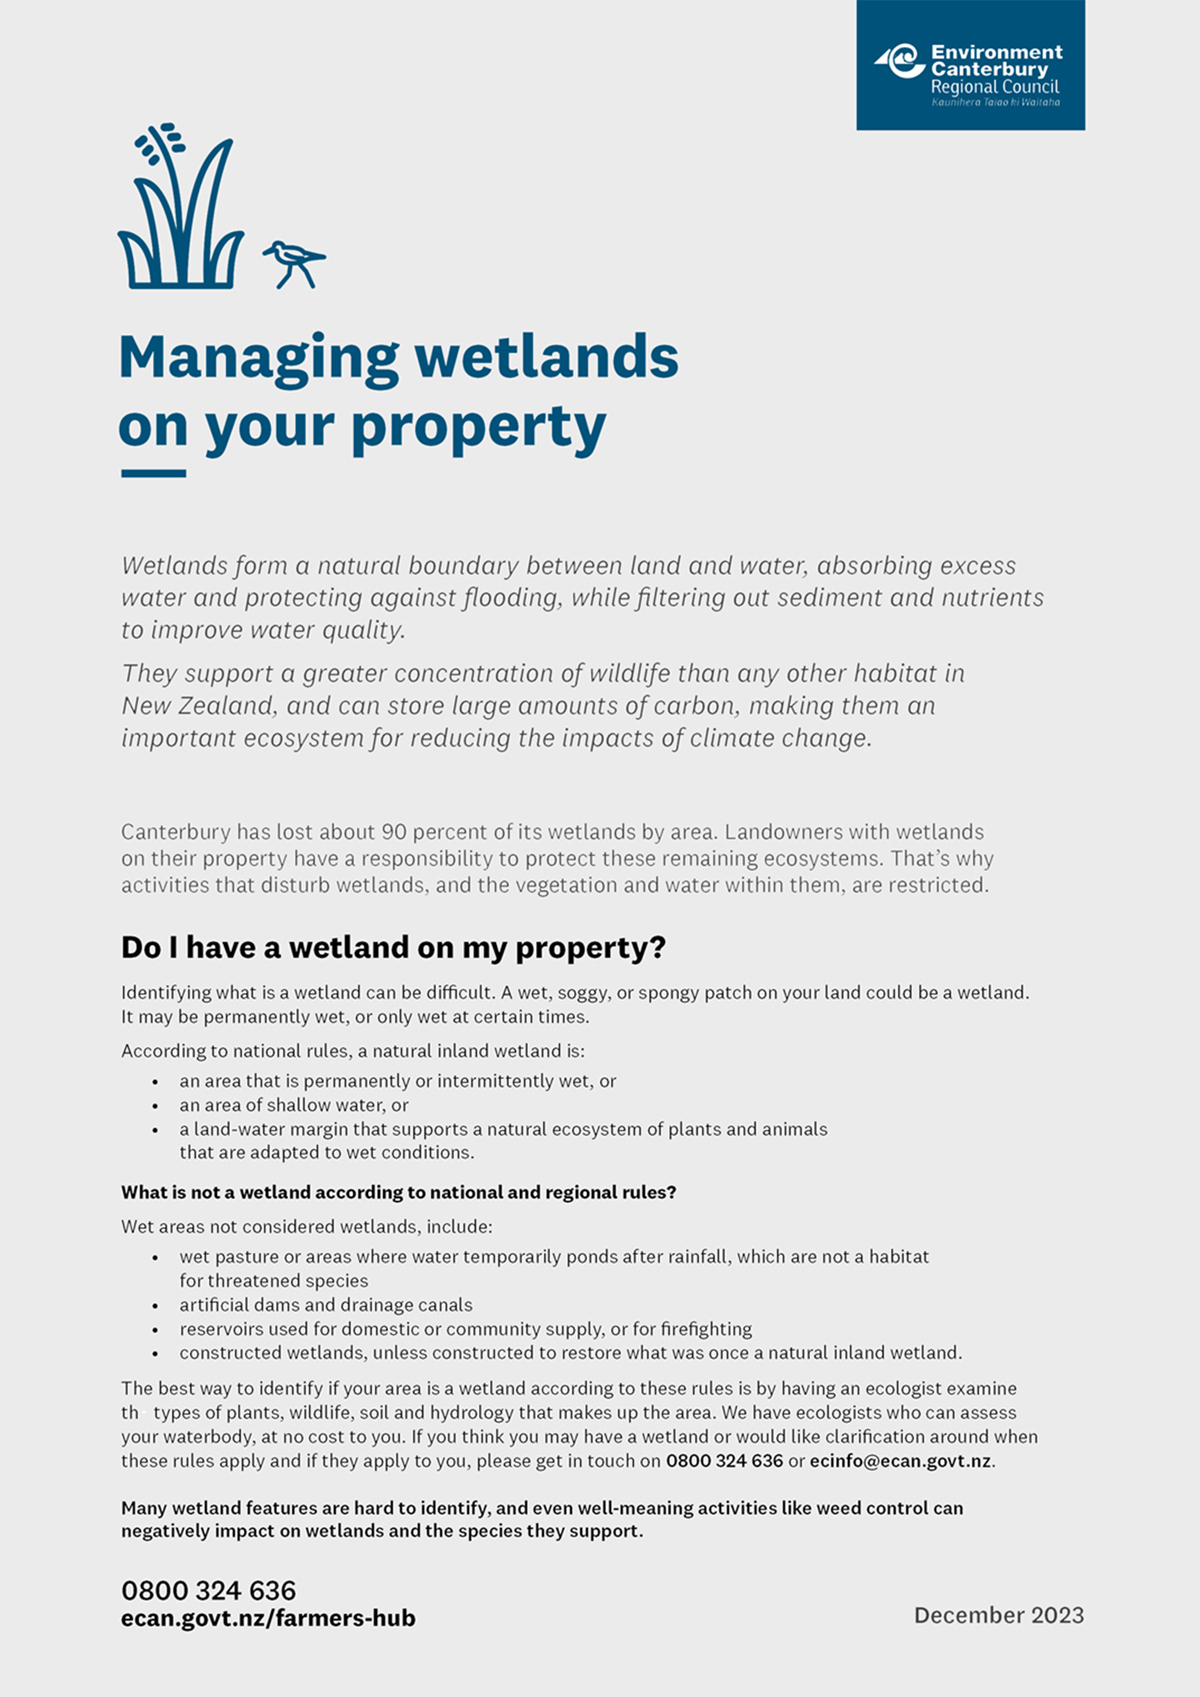 Managing wetlands on your property Dec23 cover